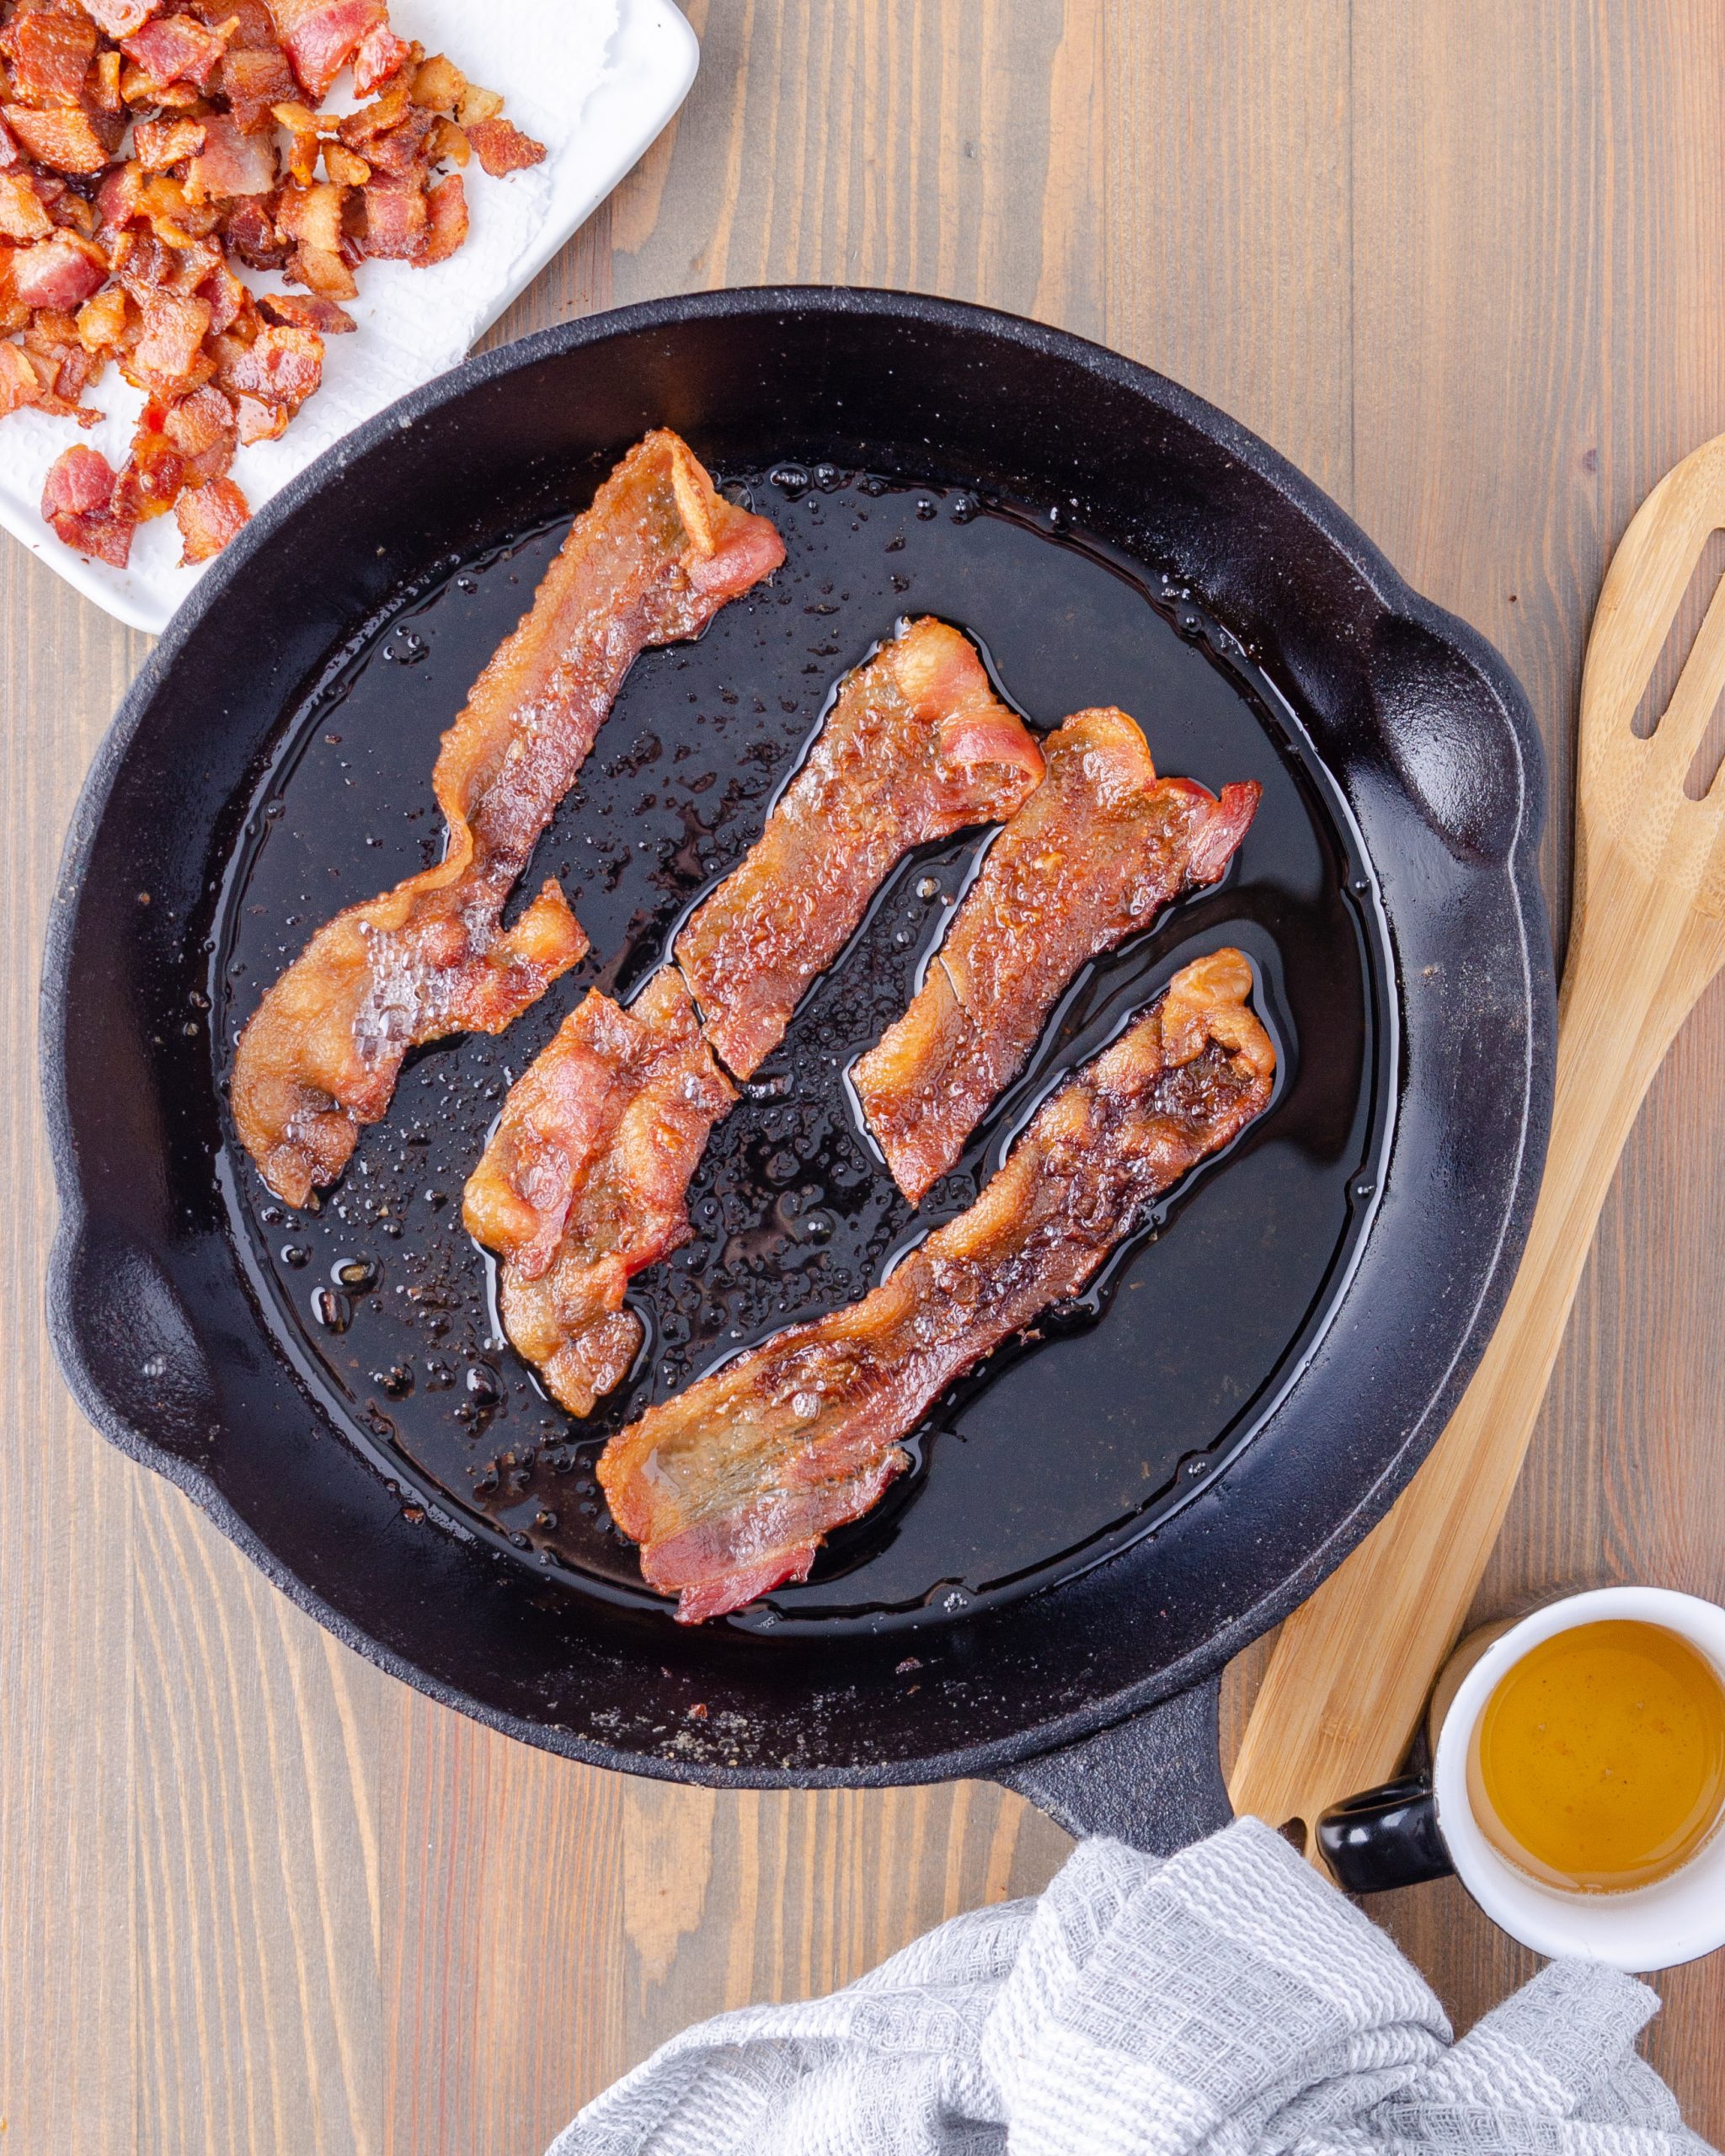 Cook the bacon and set it aside to cool. Reserve the bacon grease.